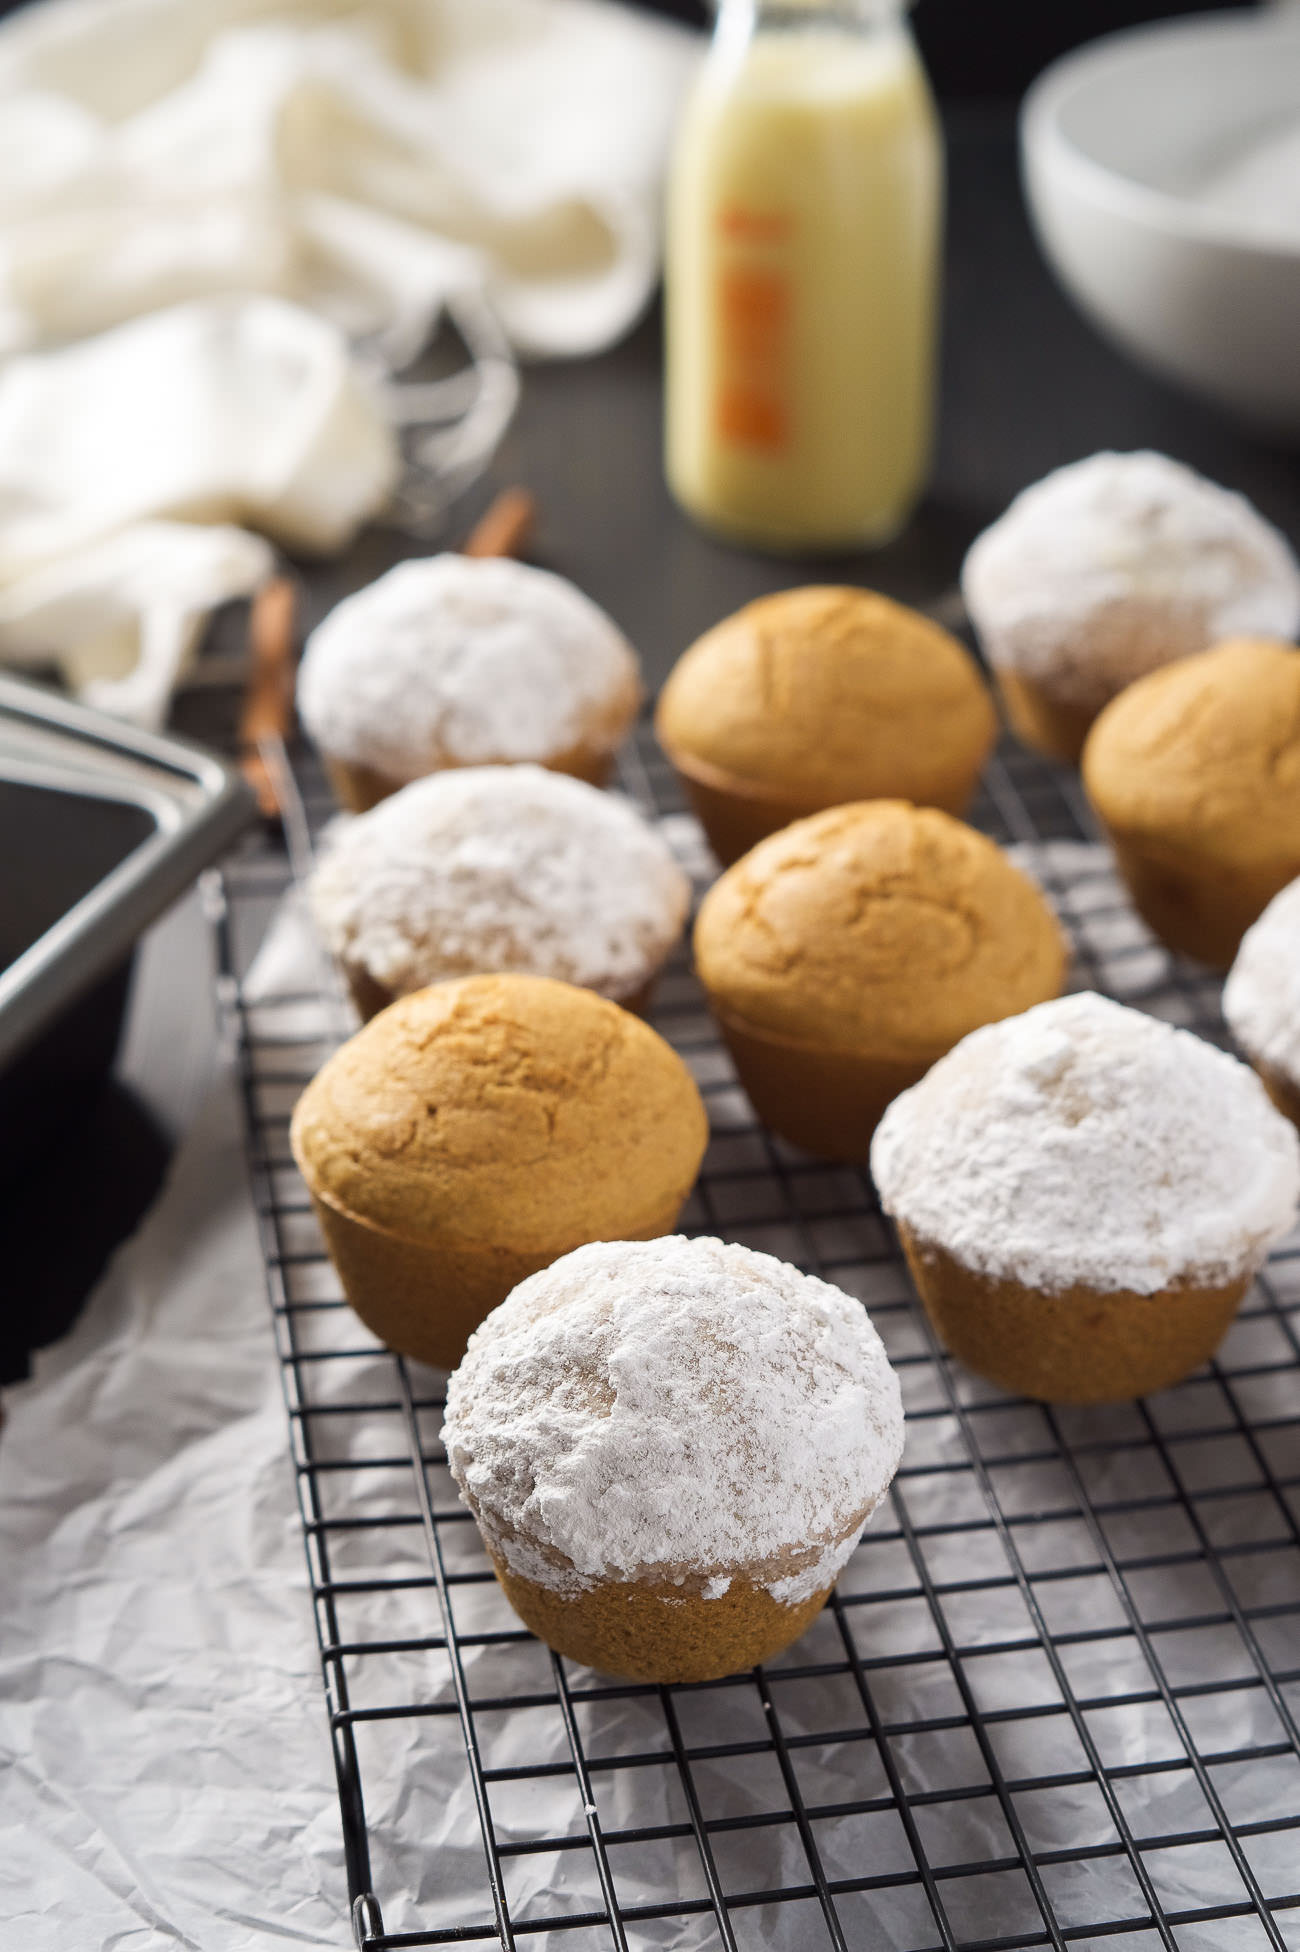 These Eggnog Donut Muffins are light and fluffy like cake donuts plus filled with the delicious flavor of eggnog. The perfect breakfast treat during the holidays!